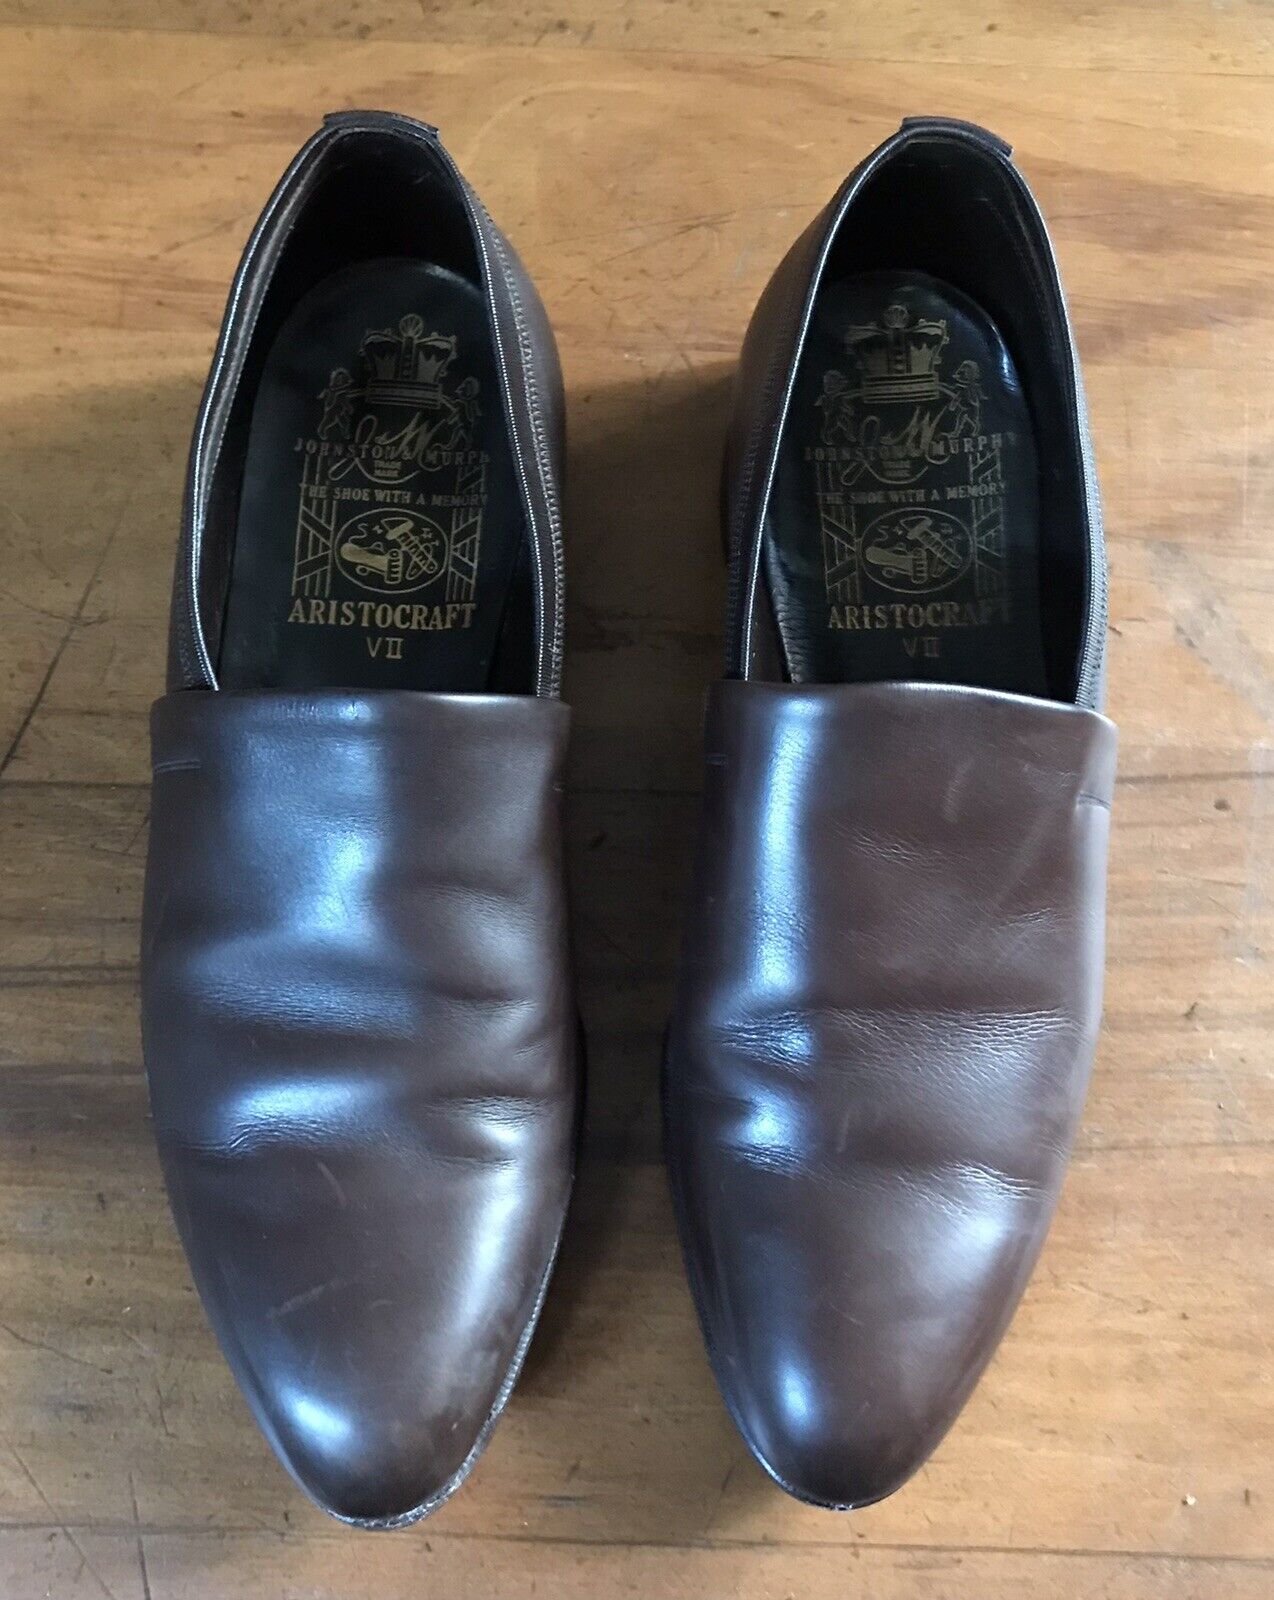 Vintage Johnston & Murphy Aristocraft, Size 7, Brown Leather Shoes